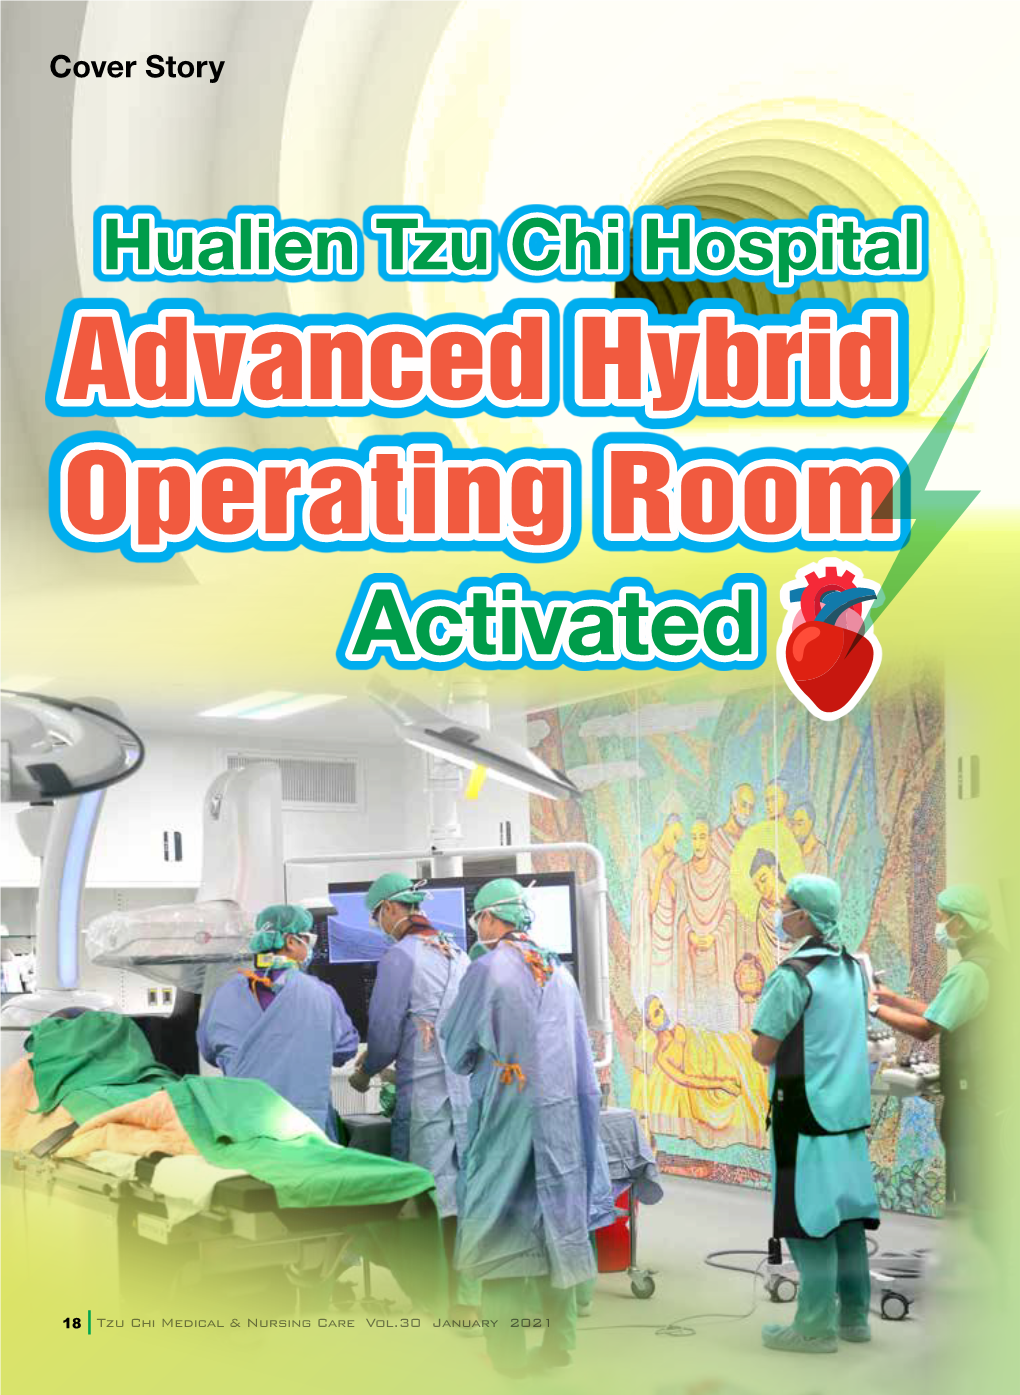 Advanced Hybrid Operating Room Activated